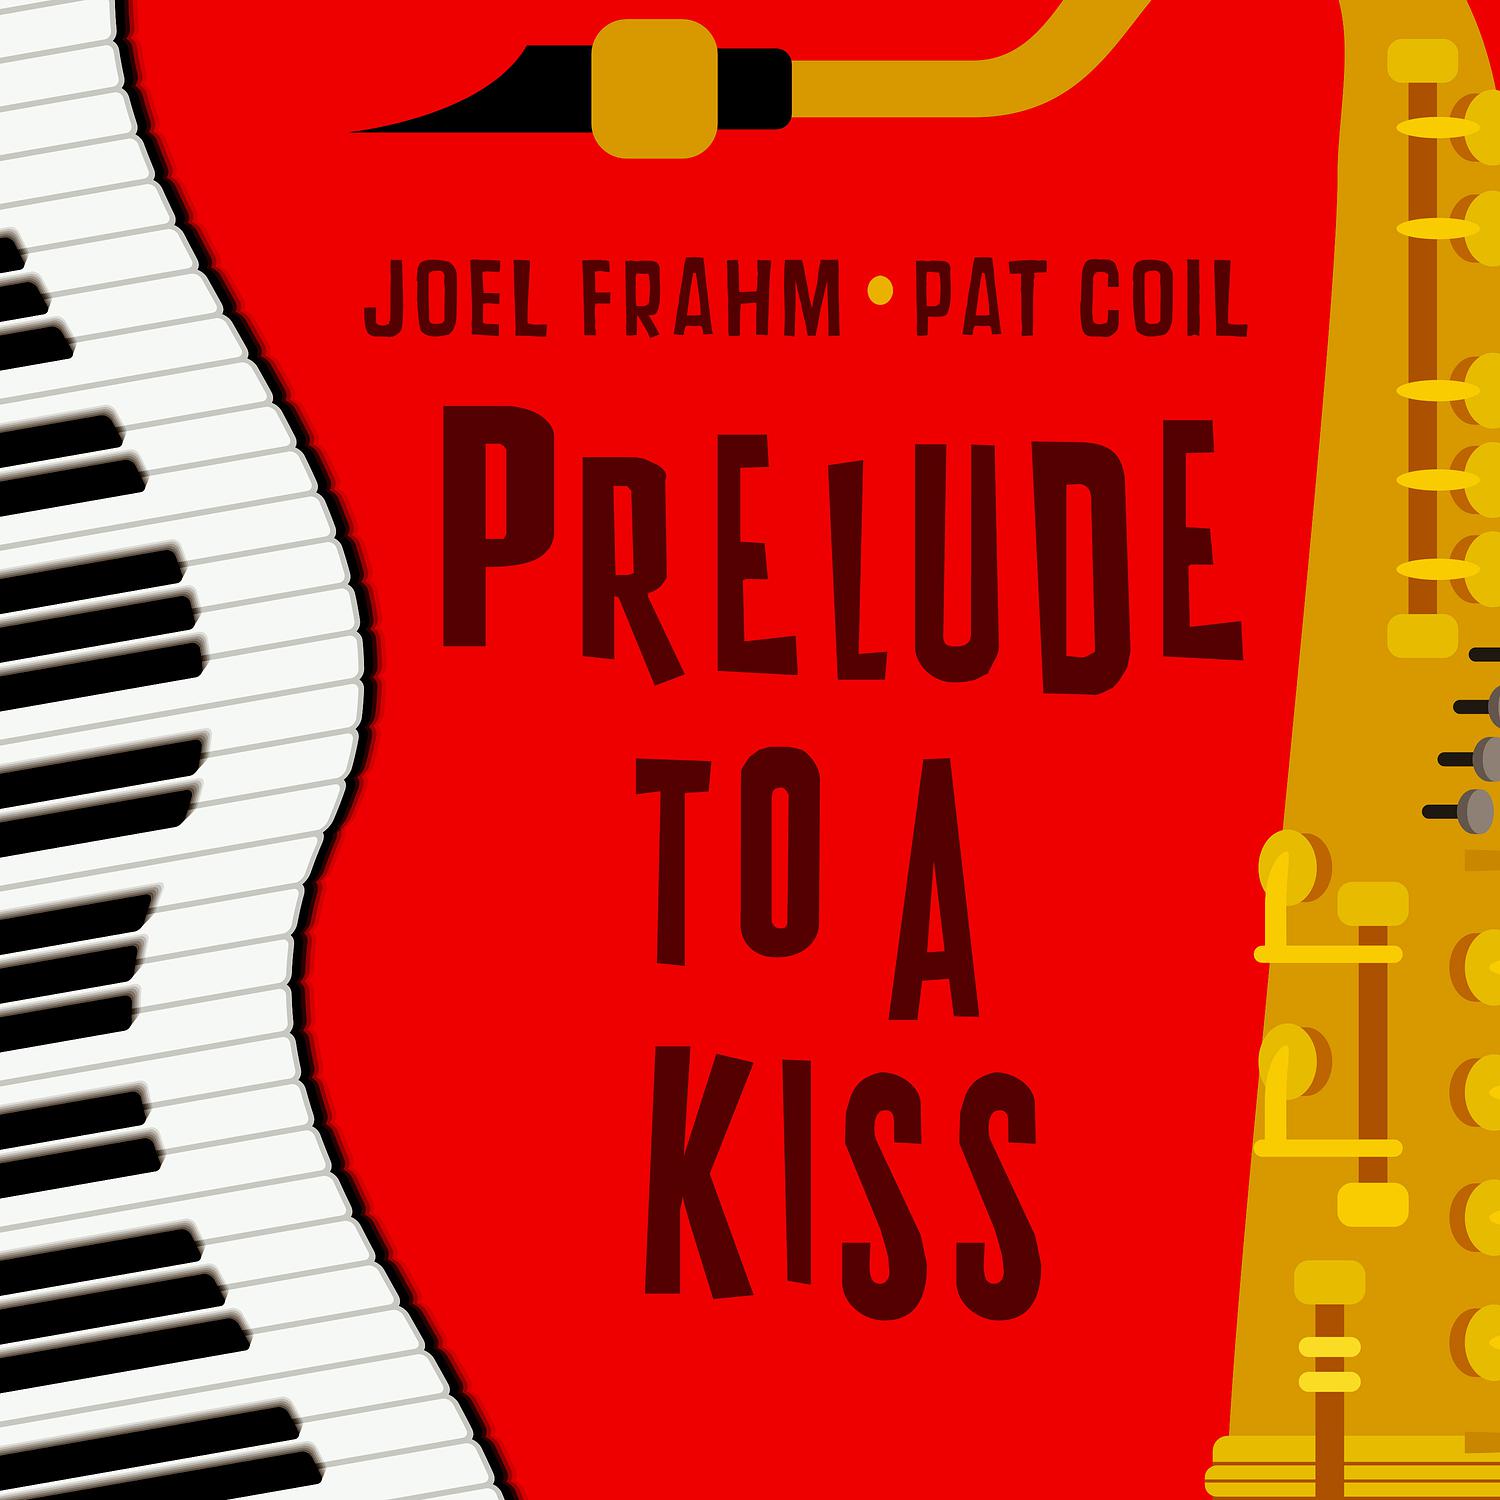 Joel Frahm - Prelude to a Kiss